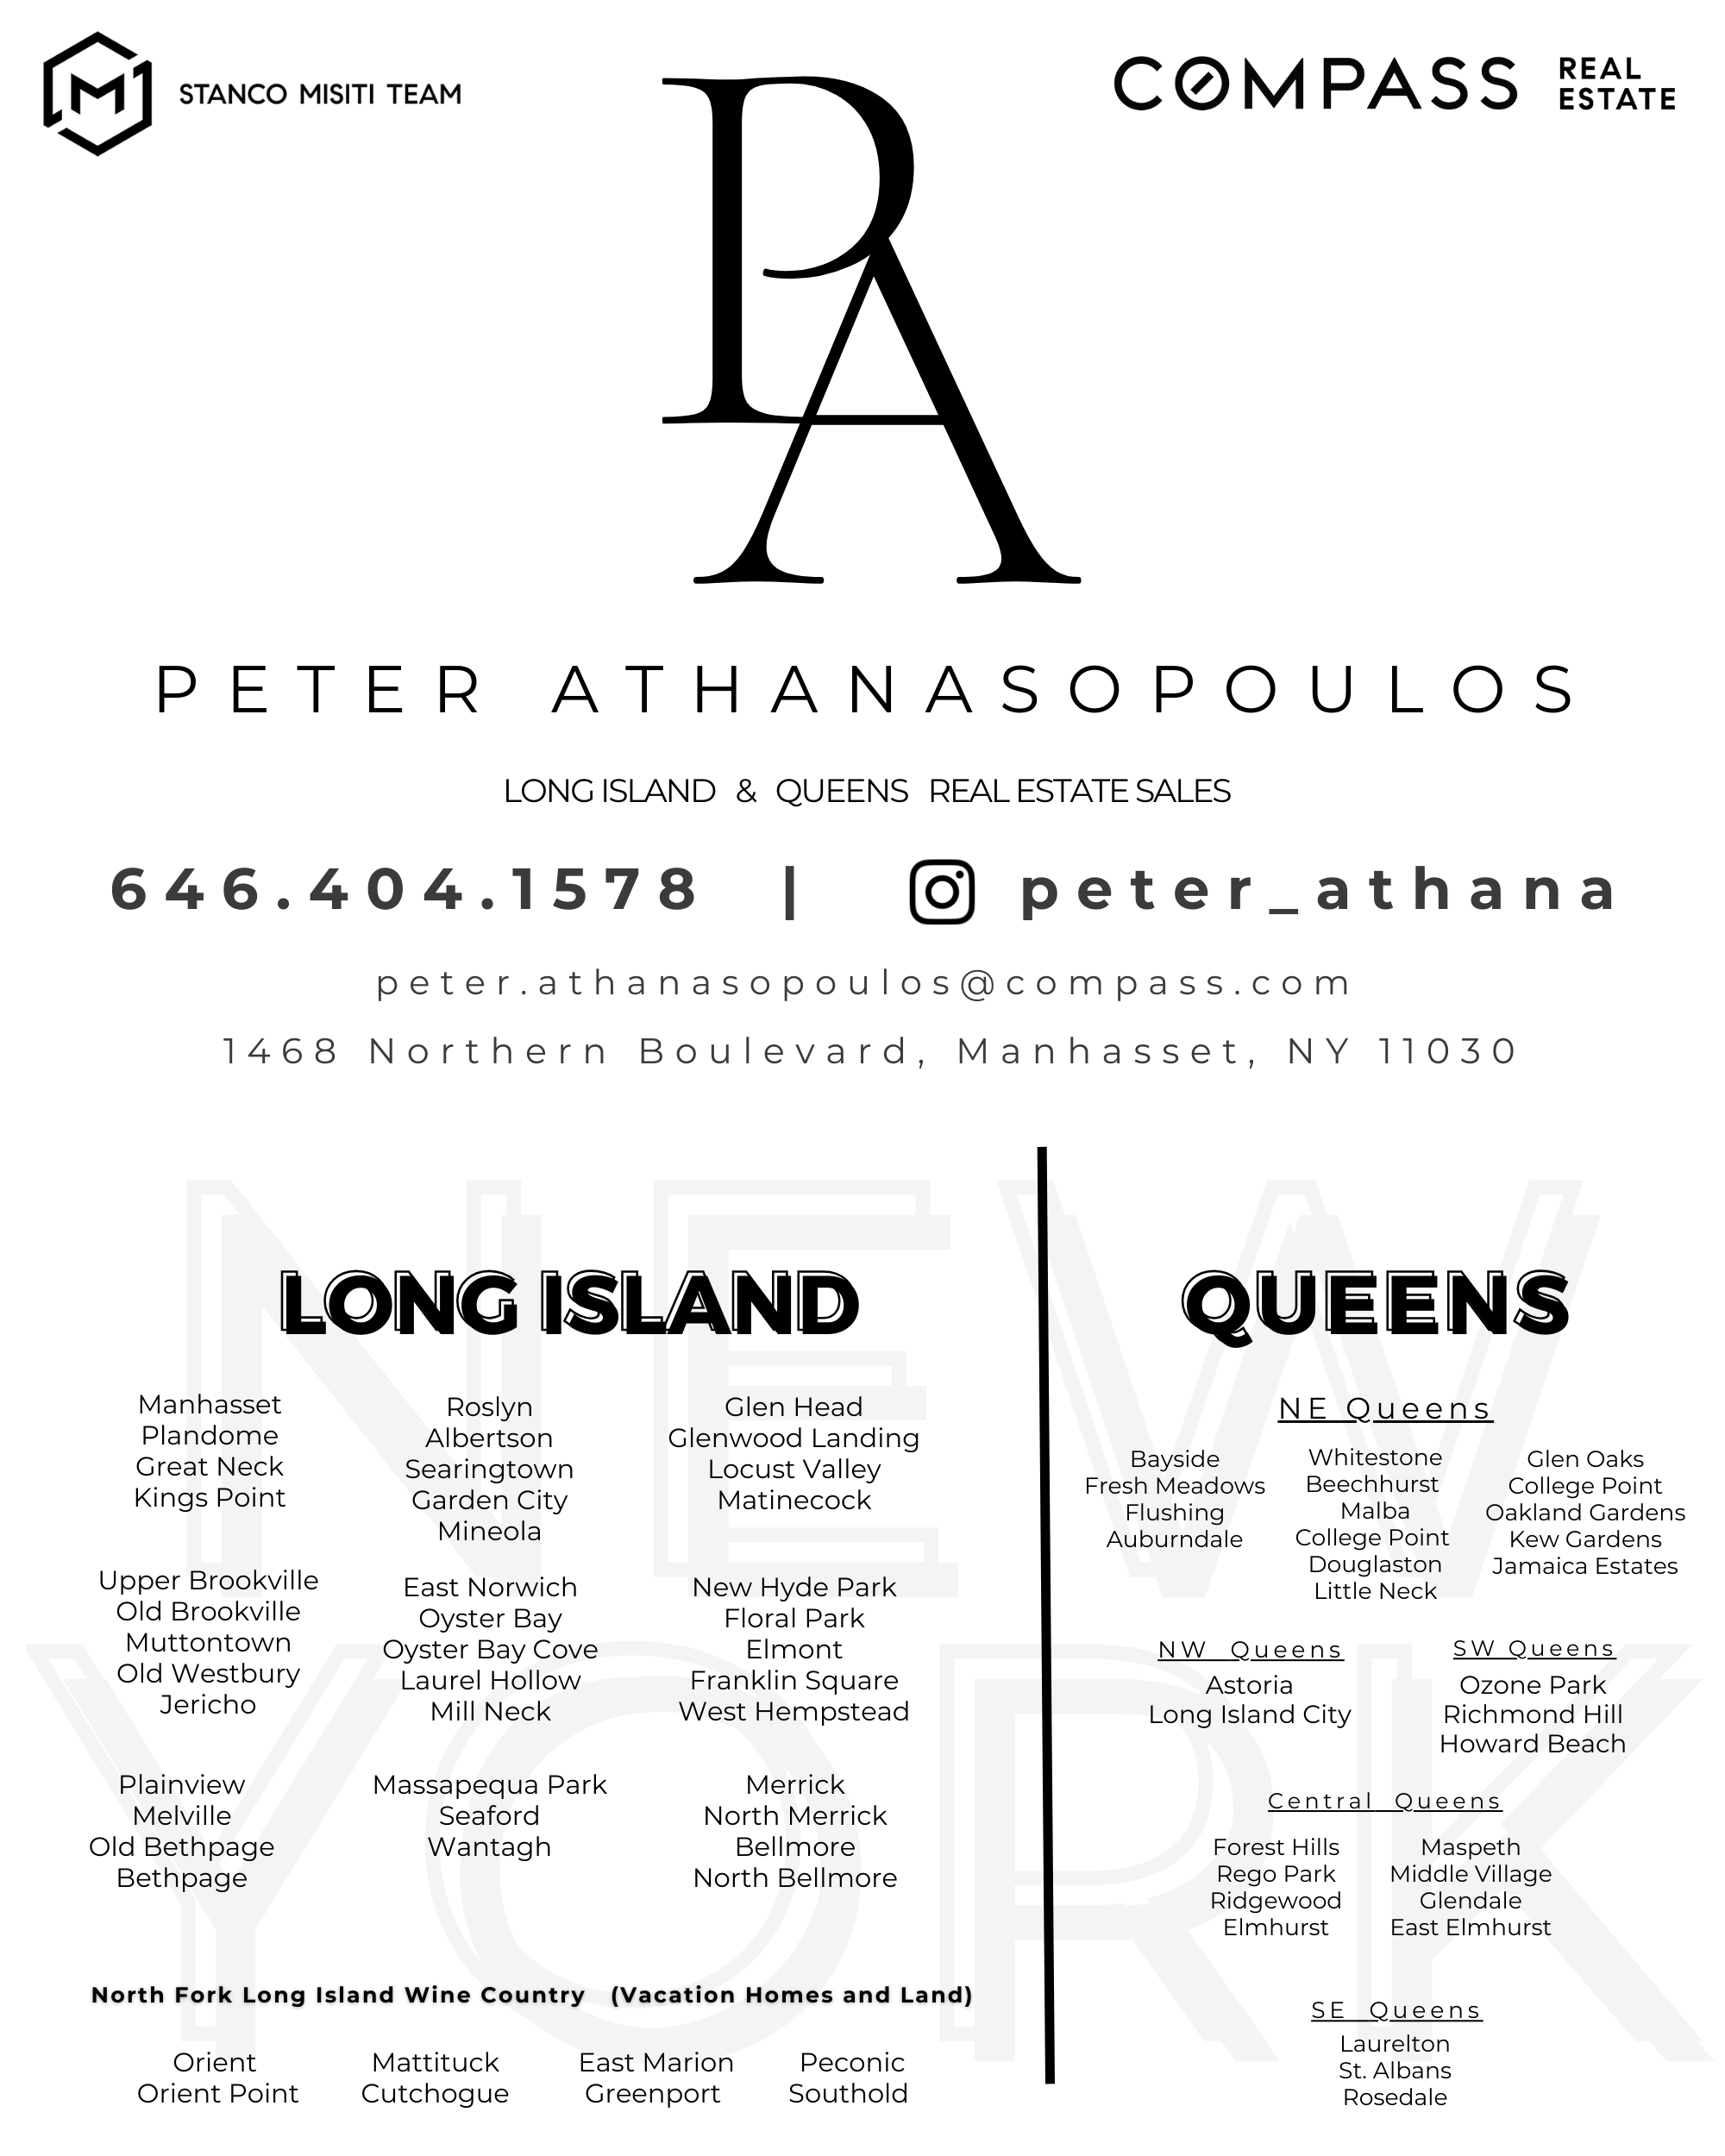 Peter Athanasopoulos - Your real estate specialist